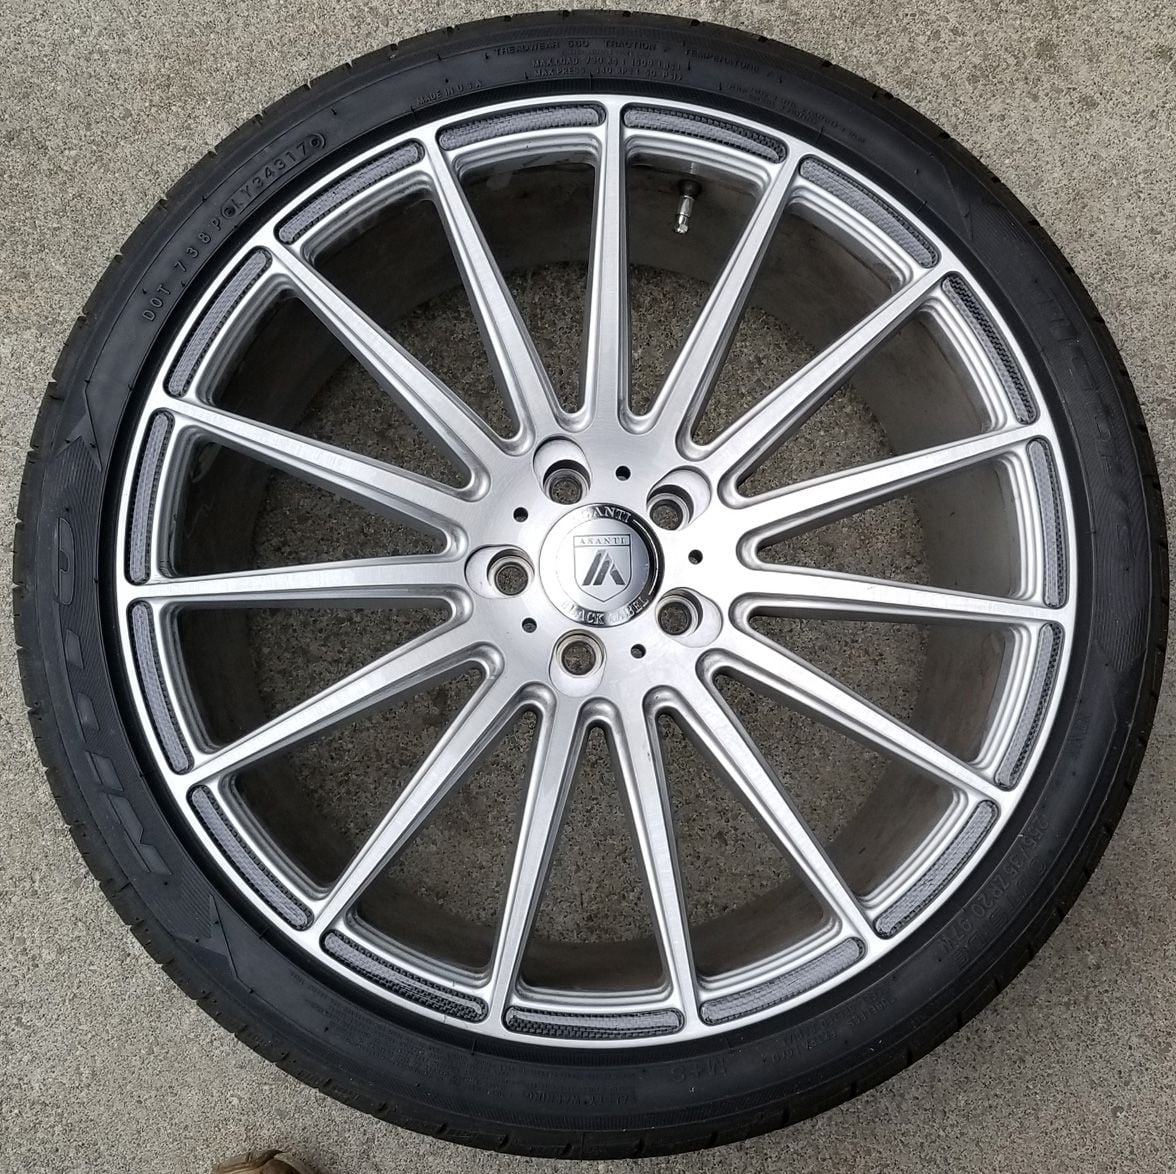 Wheels and Tires/Axles - Asanti Black Label ABL-14 Wheels and Tires ($1,500 + shipping) - Used - 2014 to 2019 Jaguar F-Type - Grand Island, NY 14072, United States